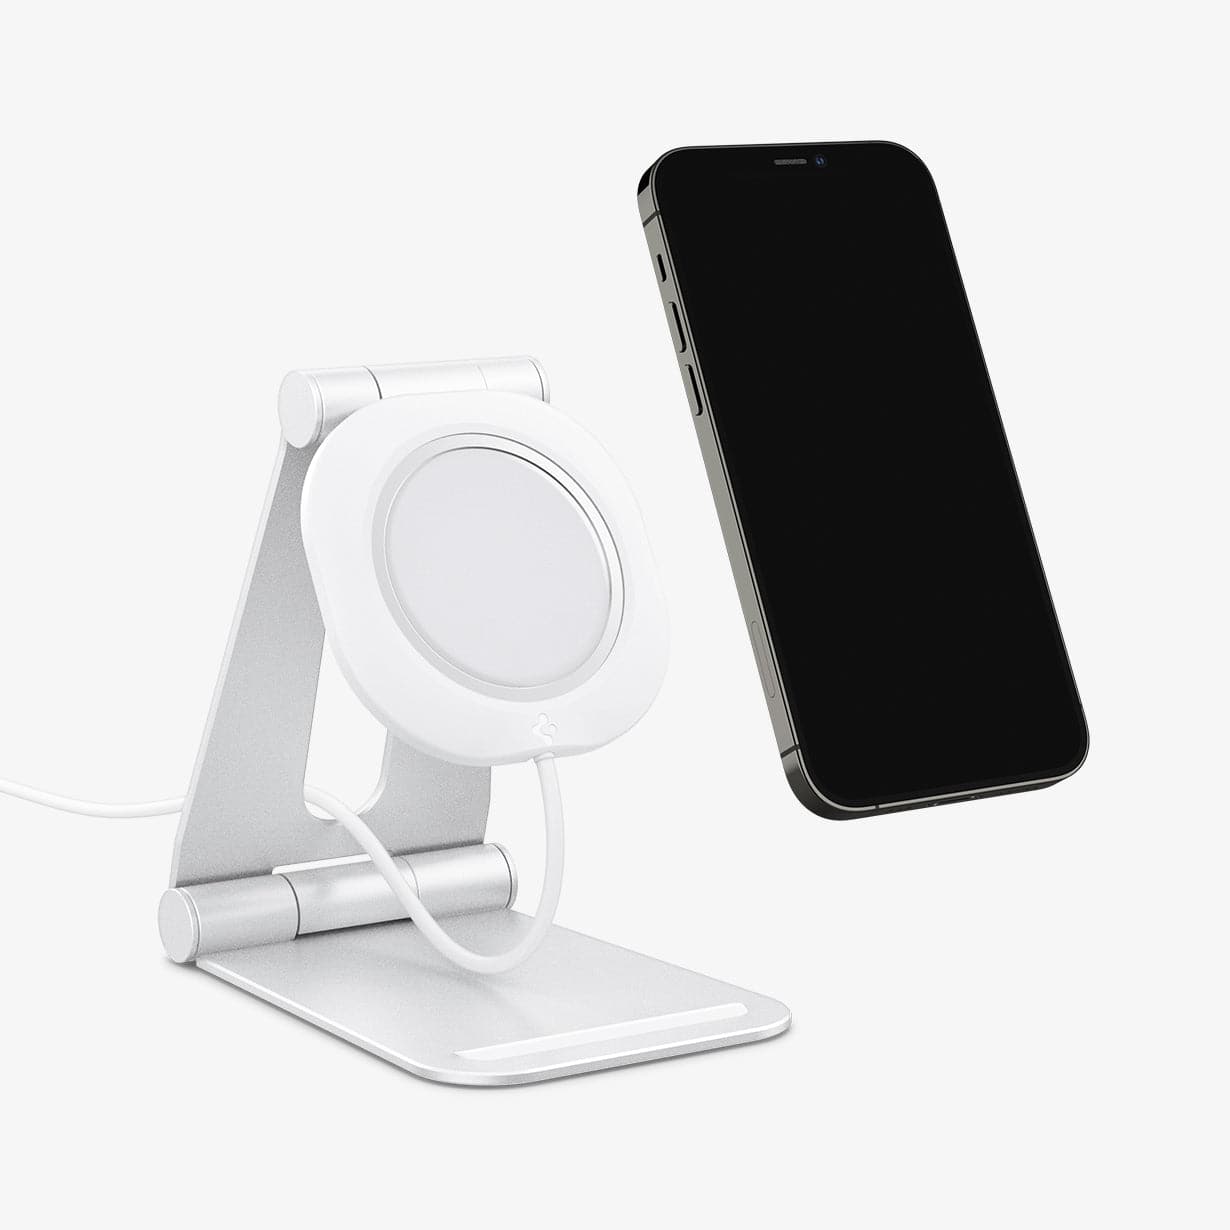 AMP02673 - MagFit Charger Stand (MagFit) in white showing the front, side, magsafe charger inserted and device hovering in front